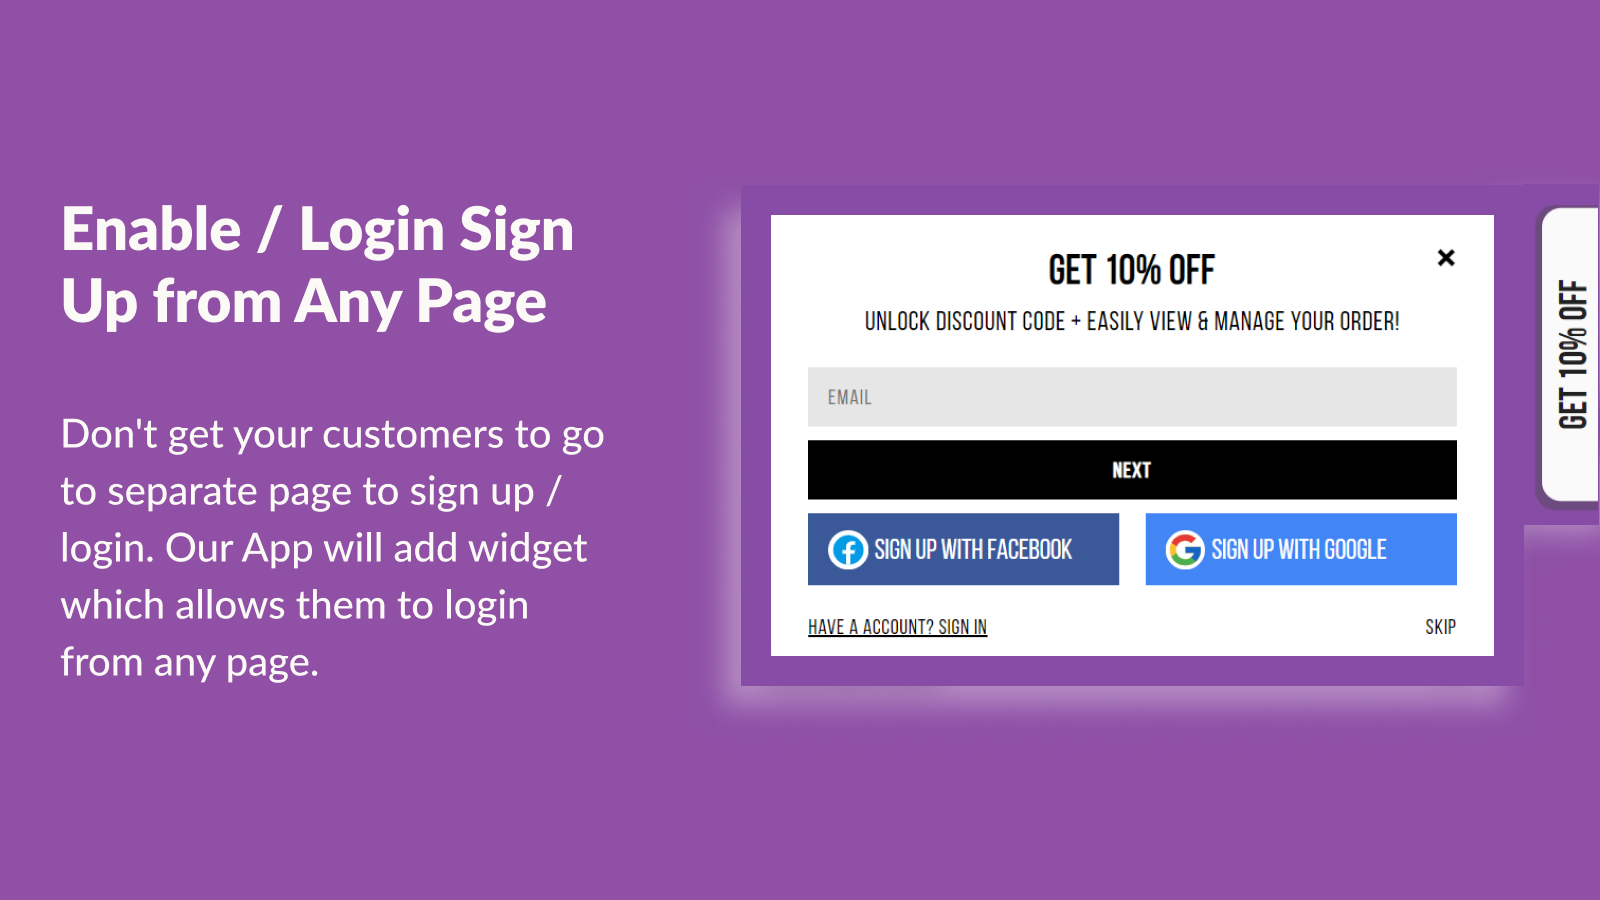 Enable Login/Sign Up from any page